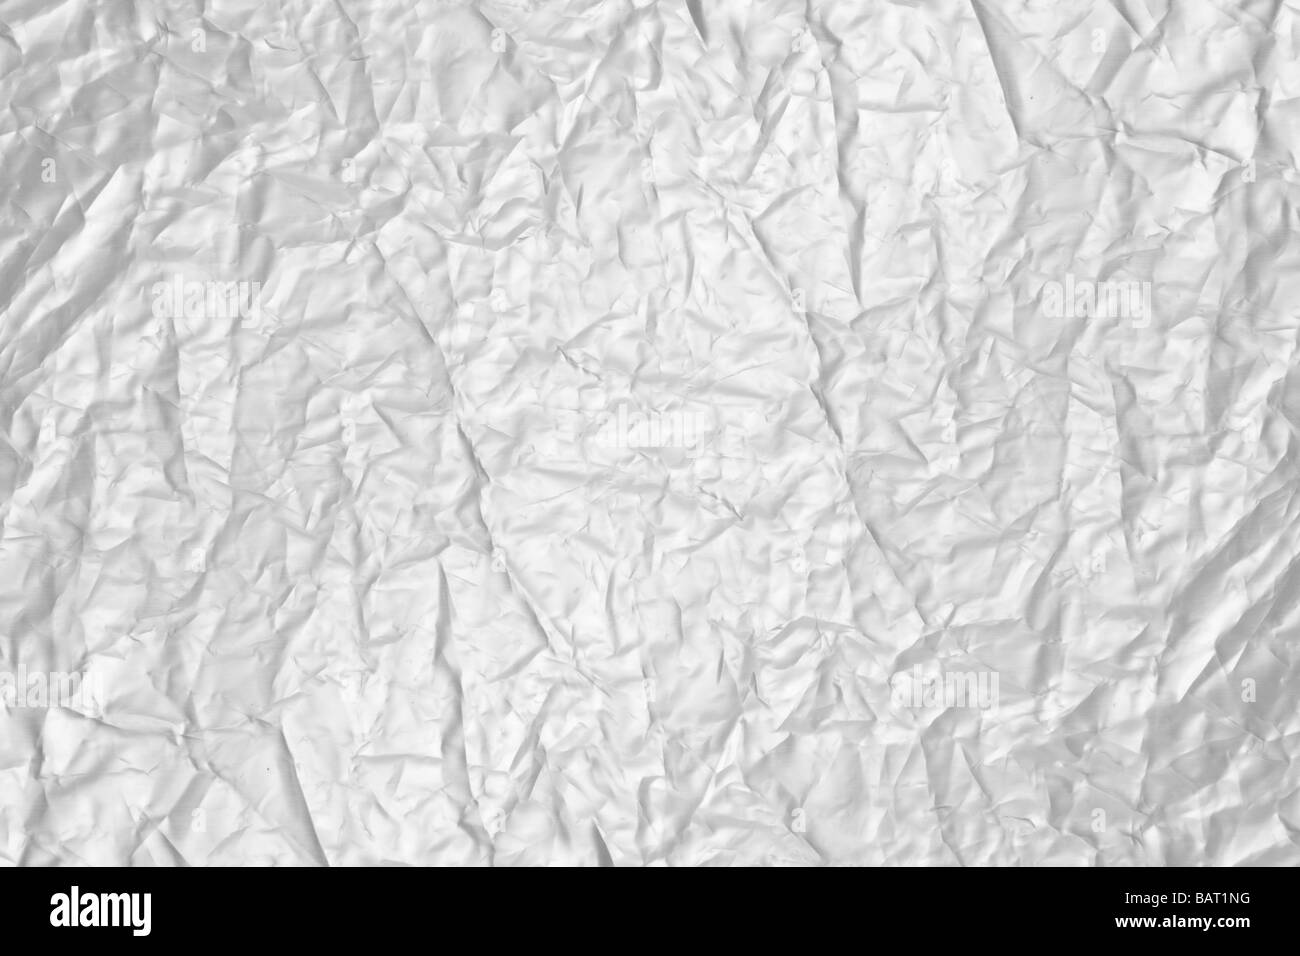 Crumpled Foil Background Stock Photo